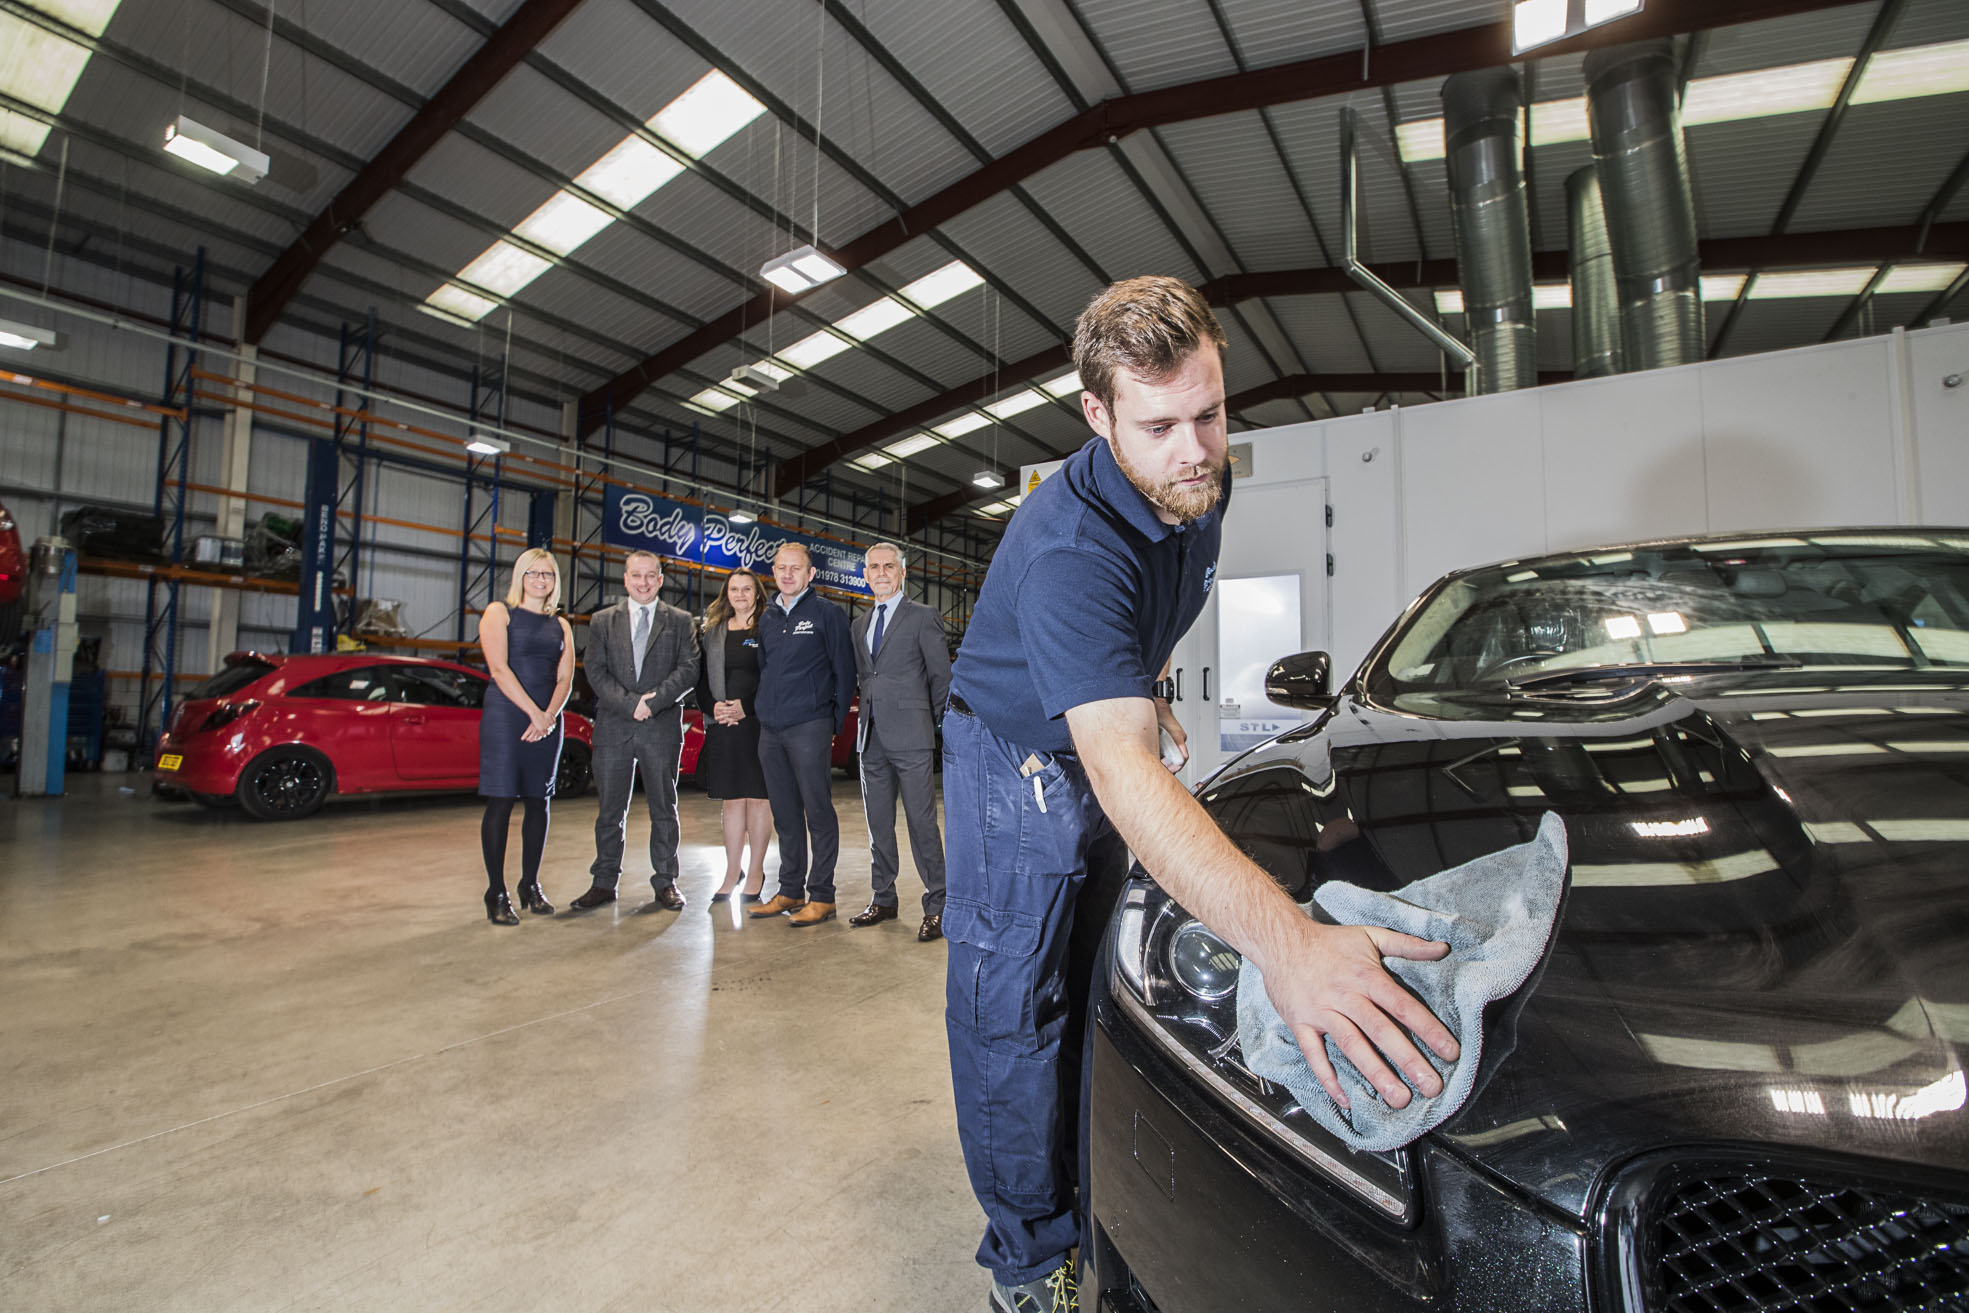 Car body repair firm doubles in size with £500k investment